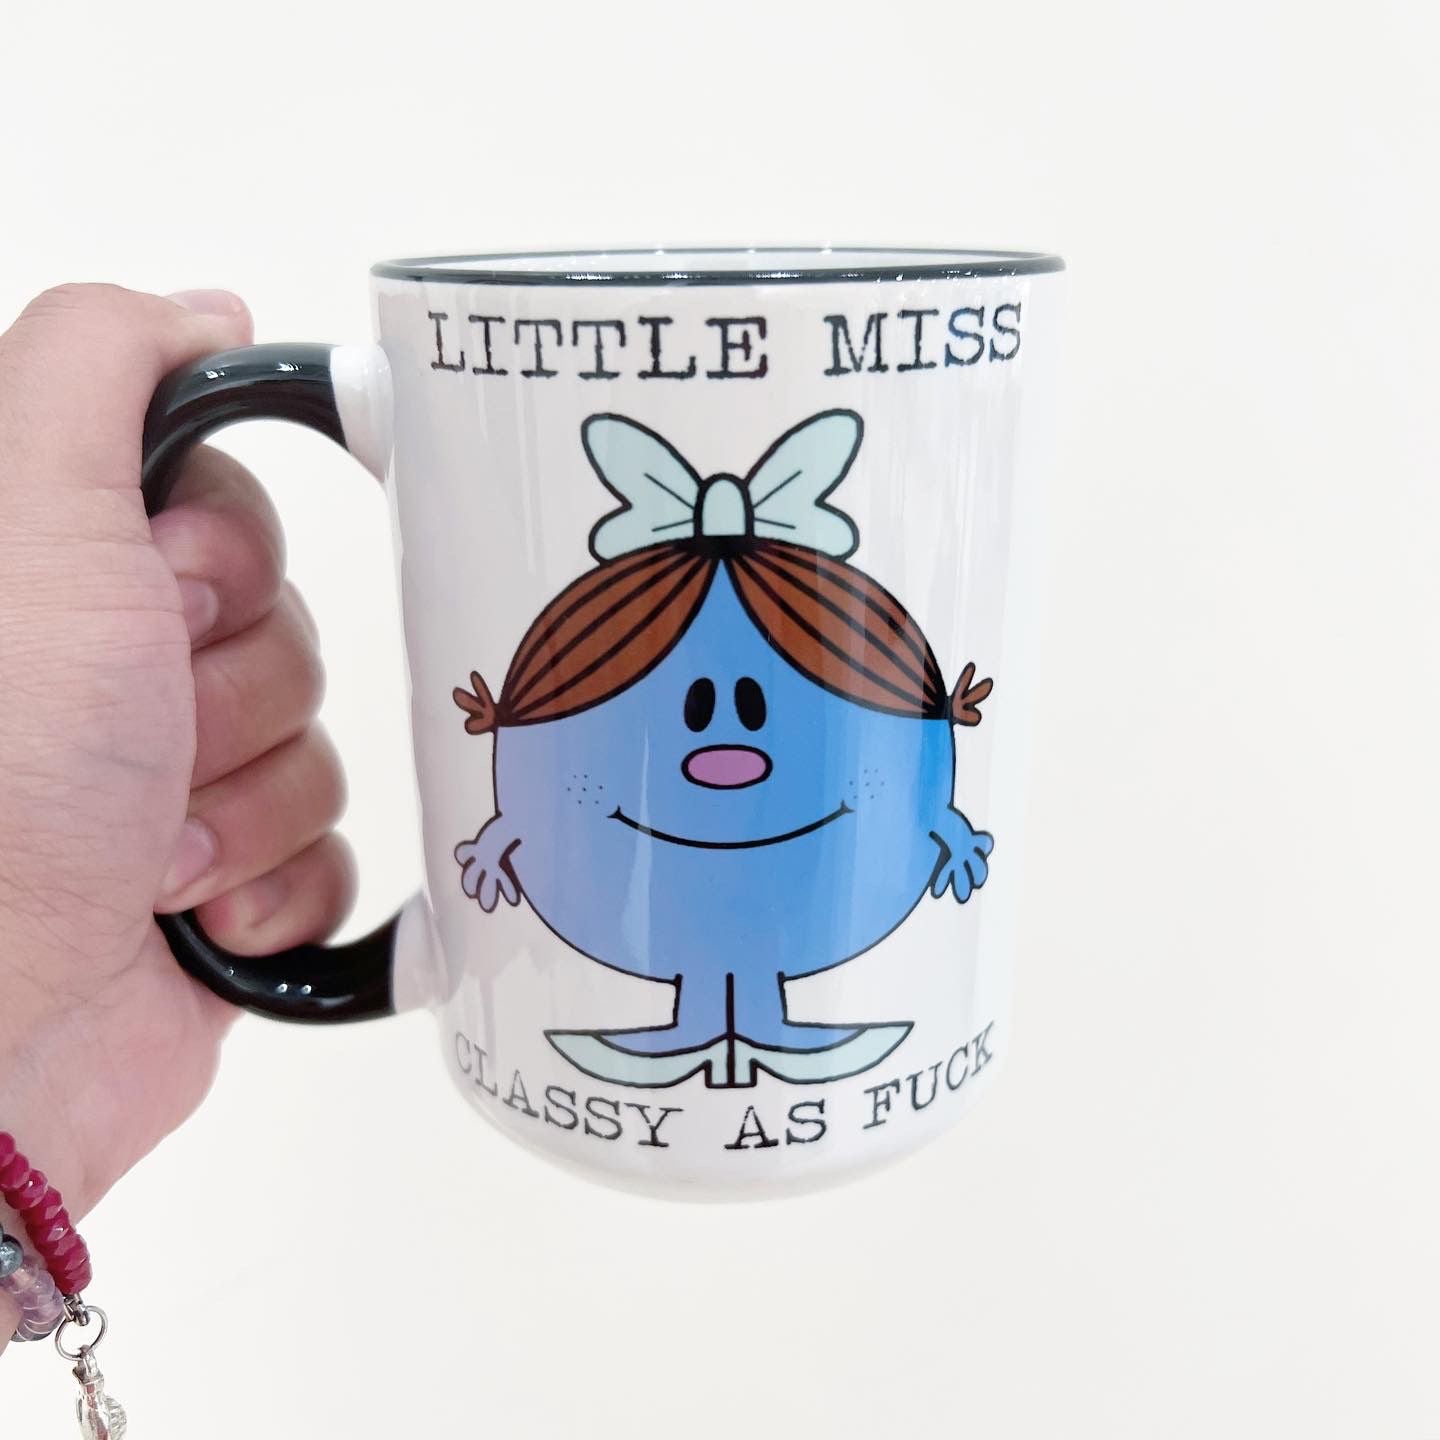 The Little Miss Collection